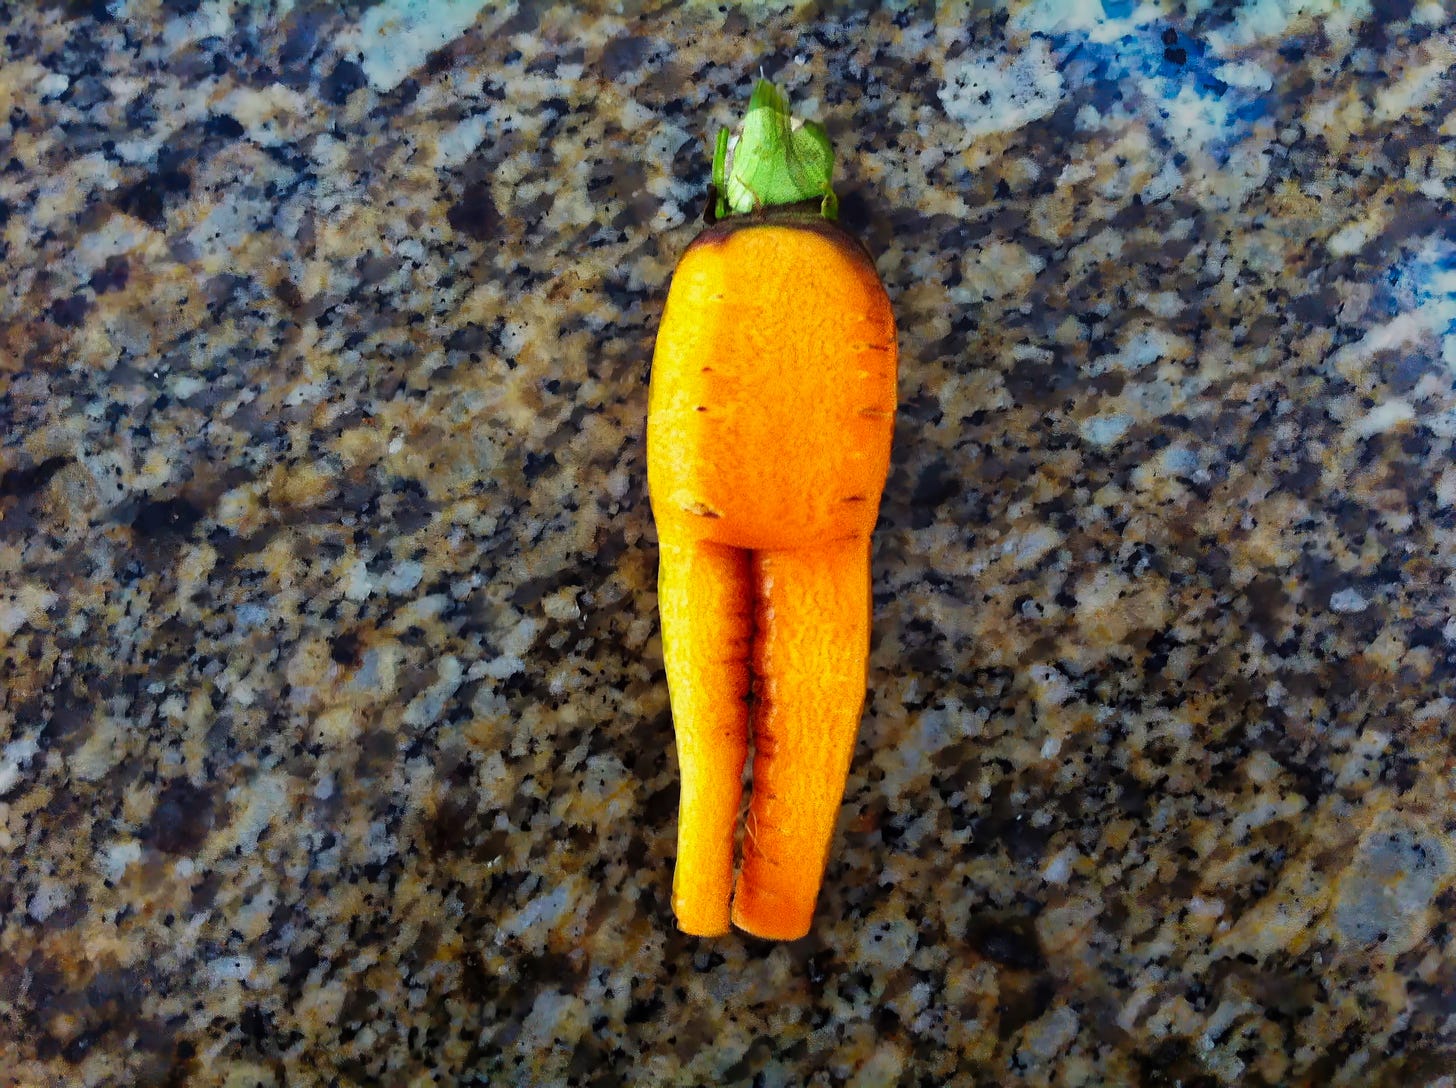 A carrot that split while growing makes it look like it has two legs attached to a body with a short green head formed from where the greenery was snipped away